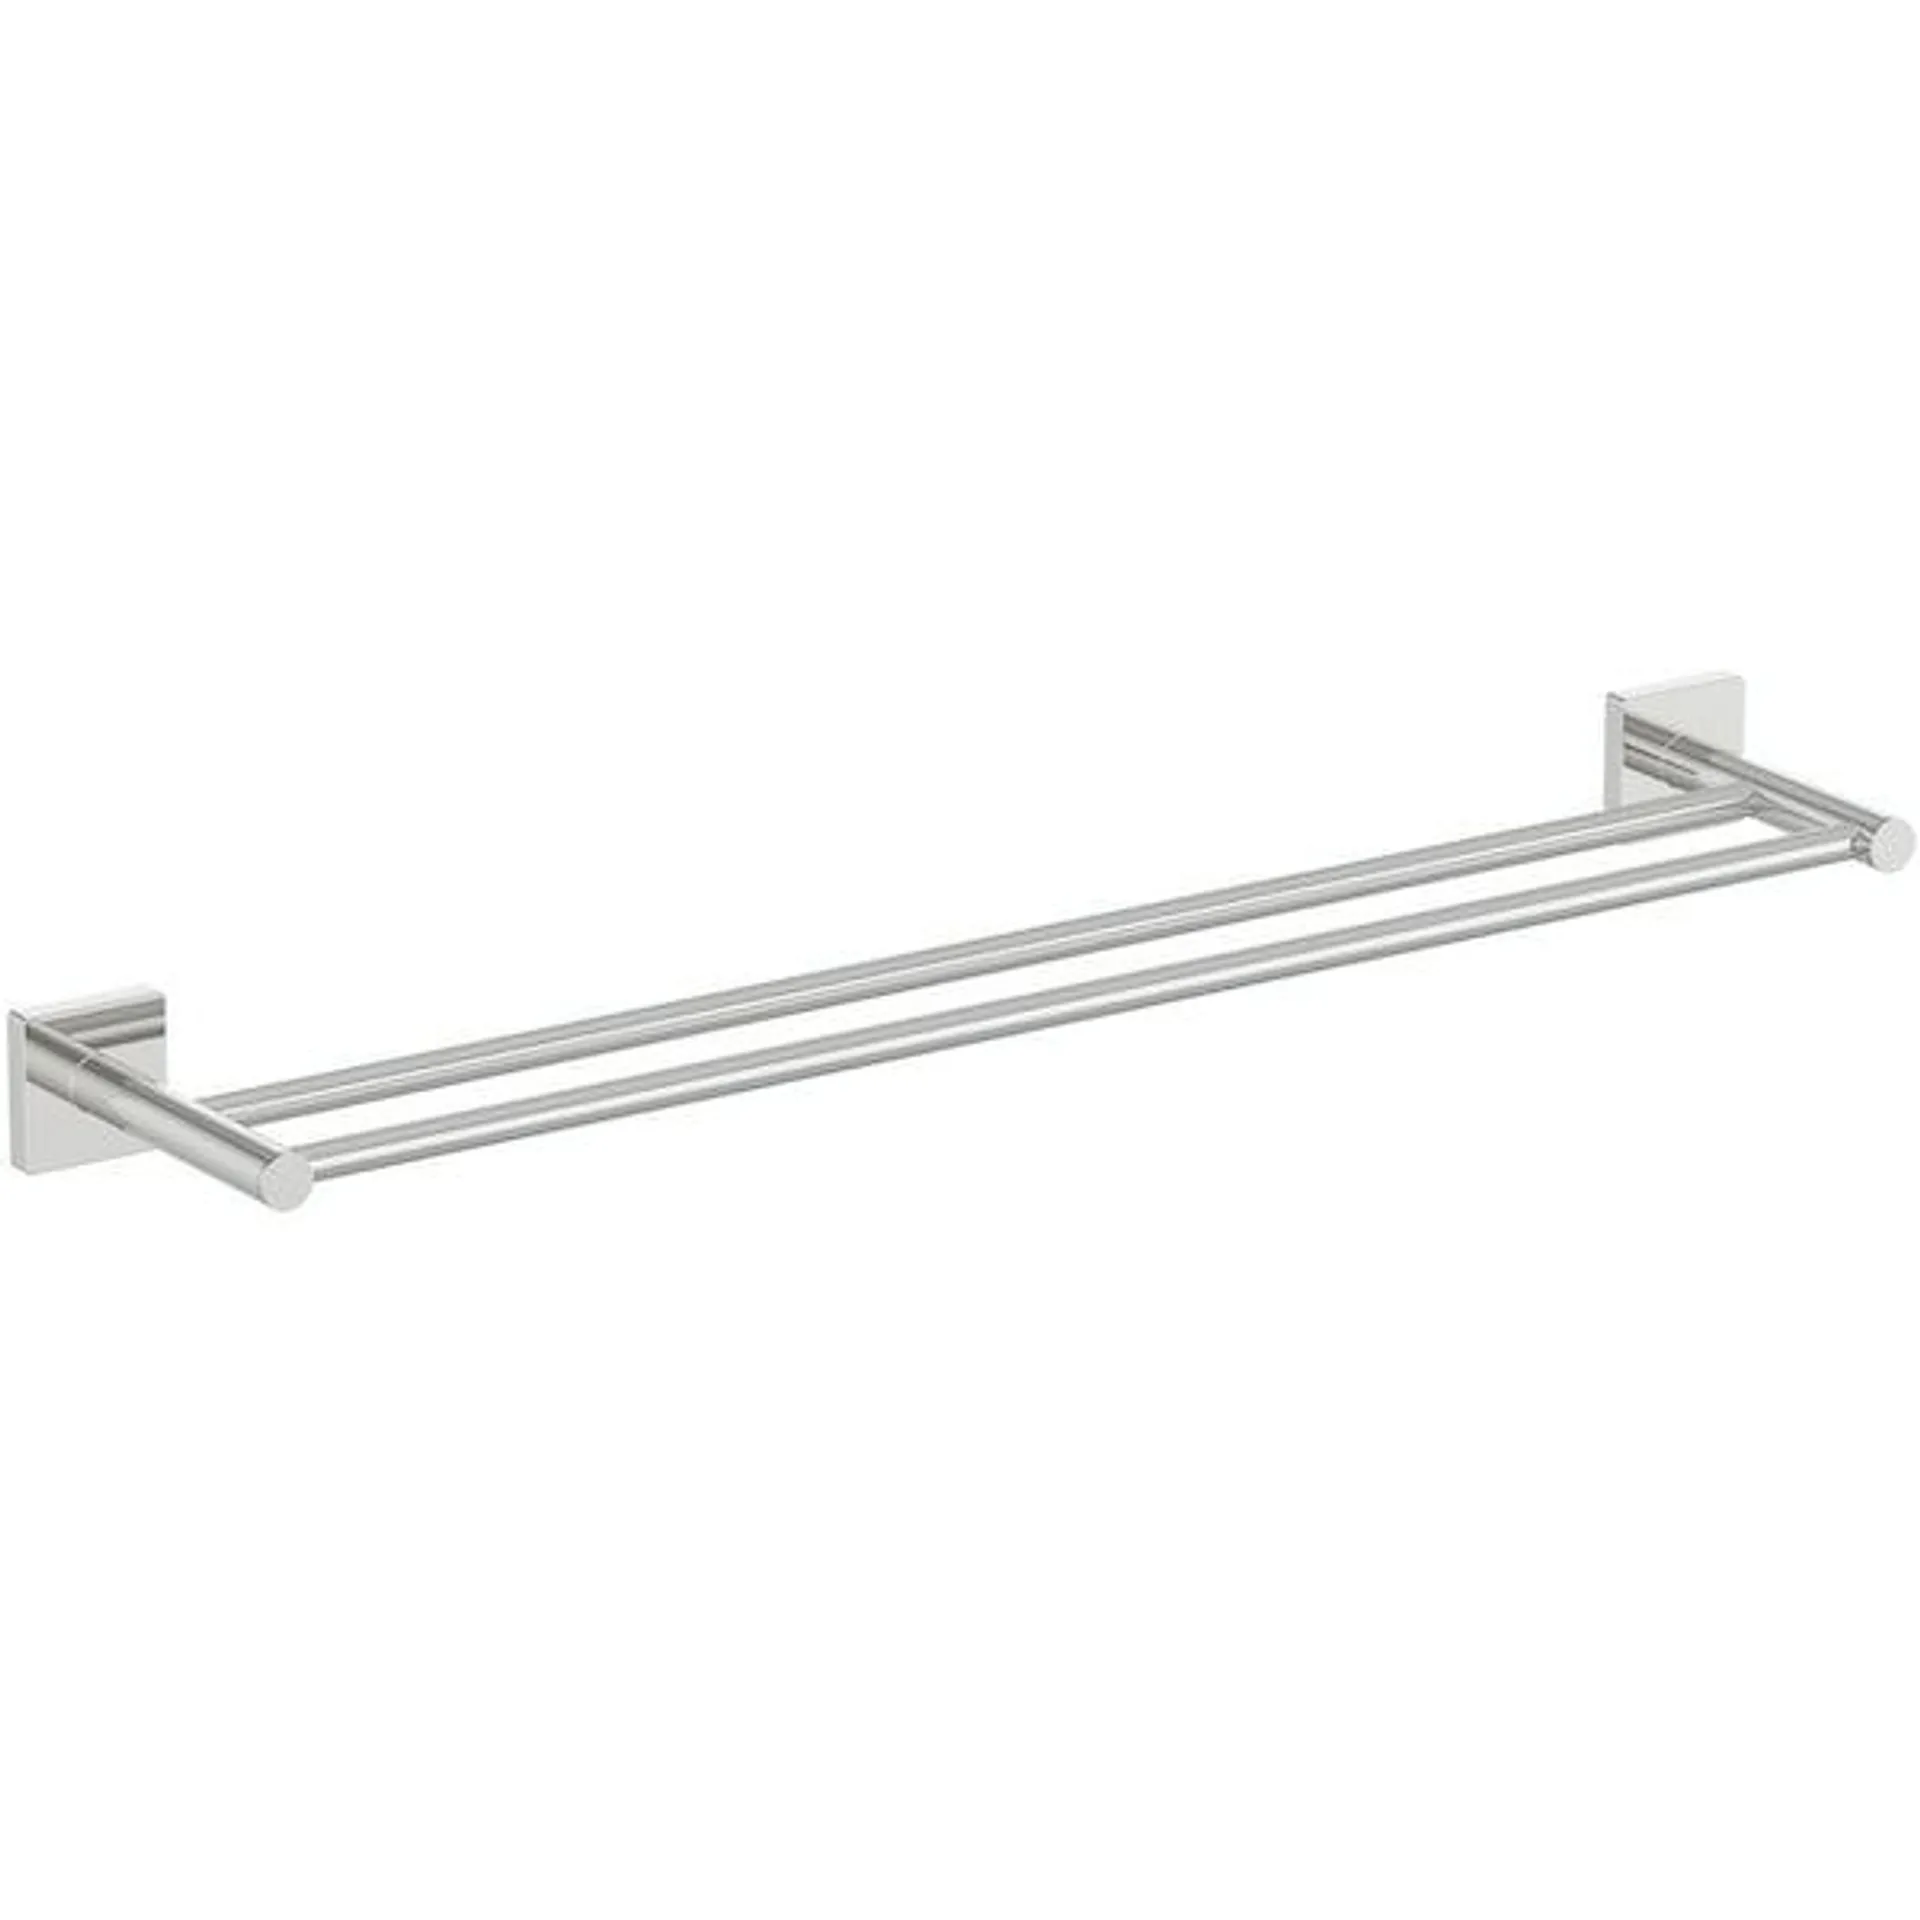 Accents square plate contemporary double towel bar